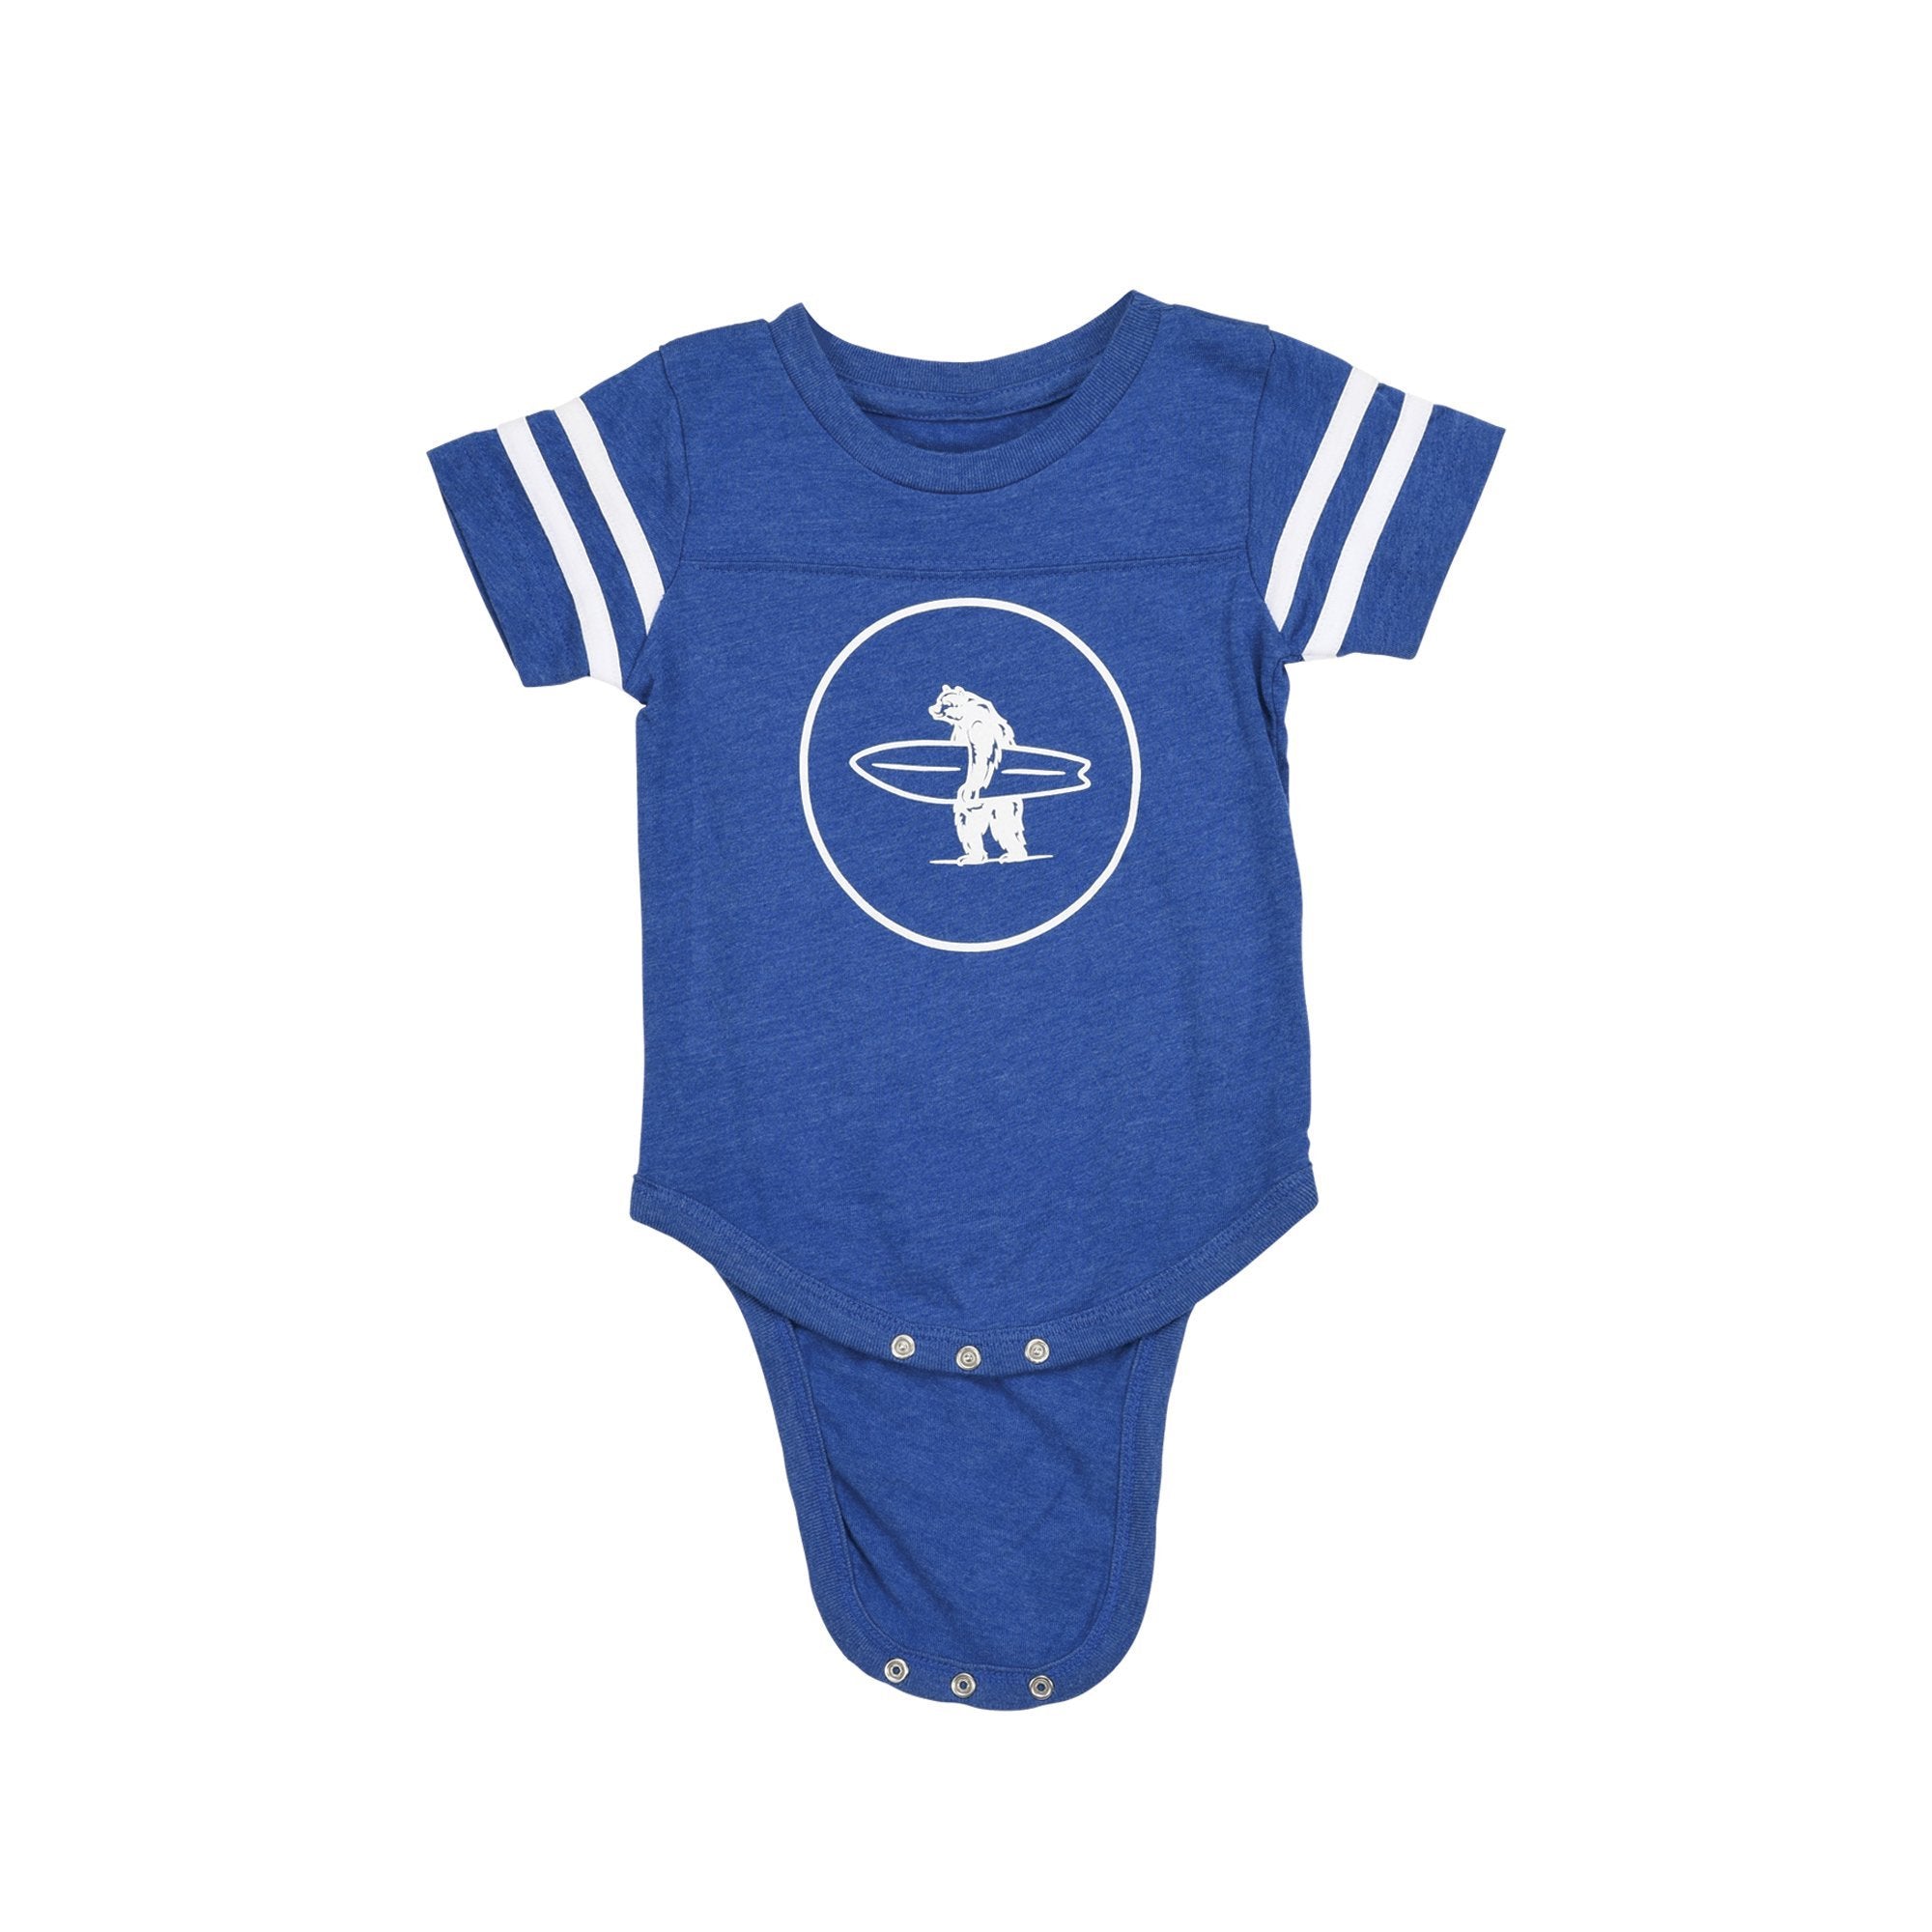 Everyday California Brutus Onesie - blue baby onesie with Brutus logo on the front and Everyday California print on the back.